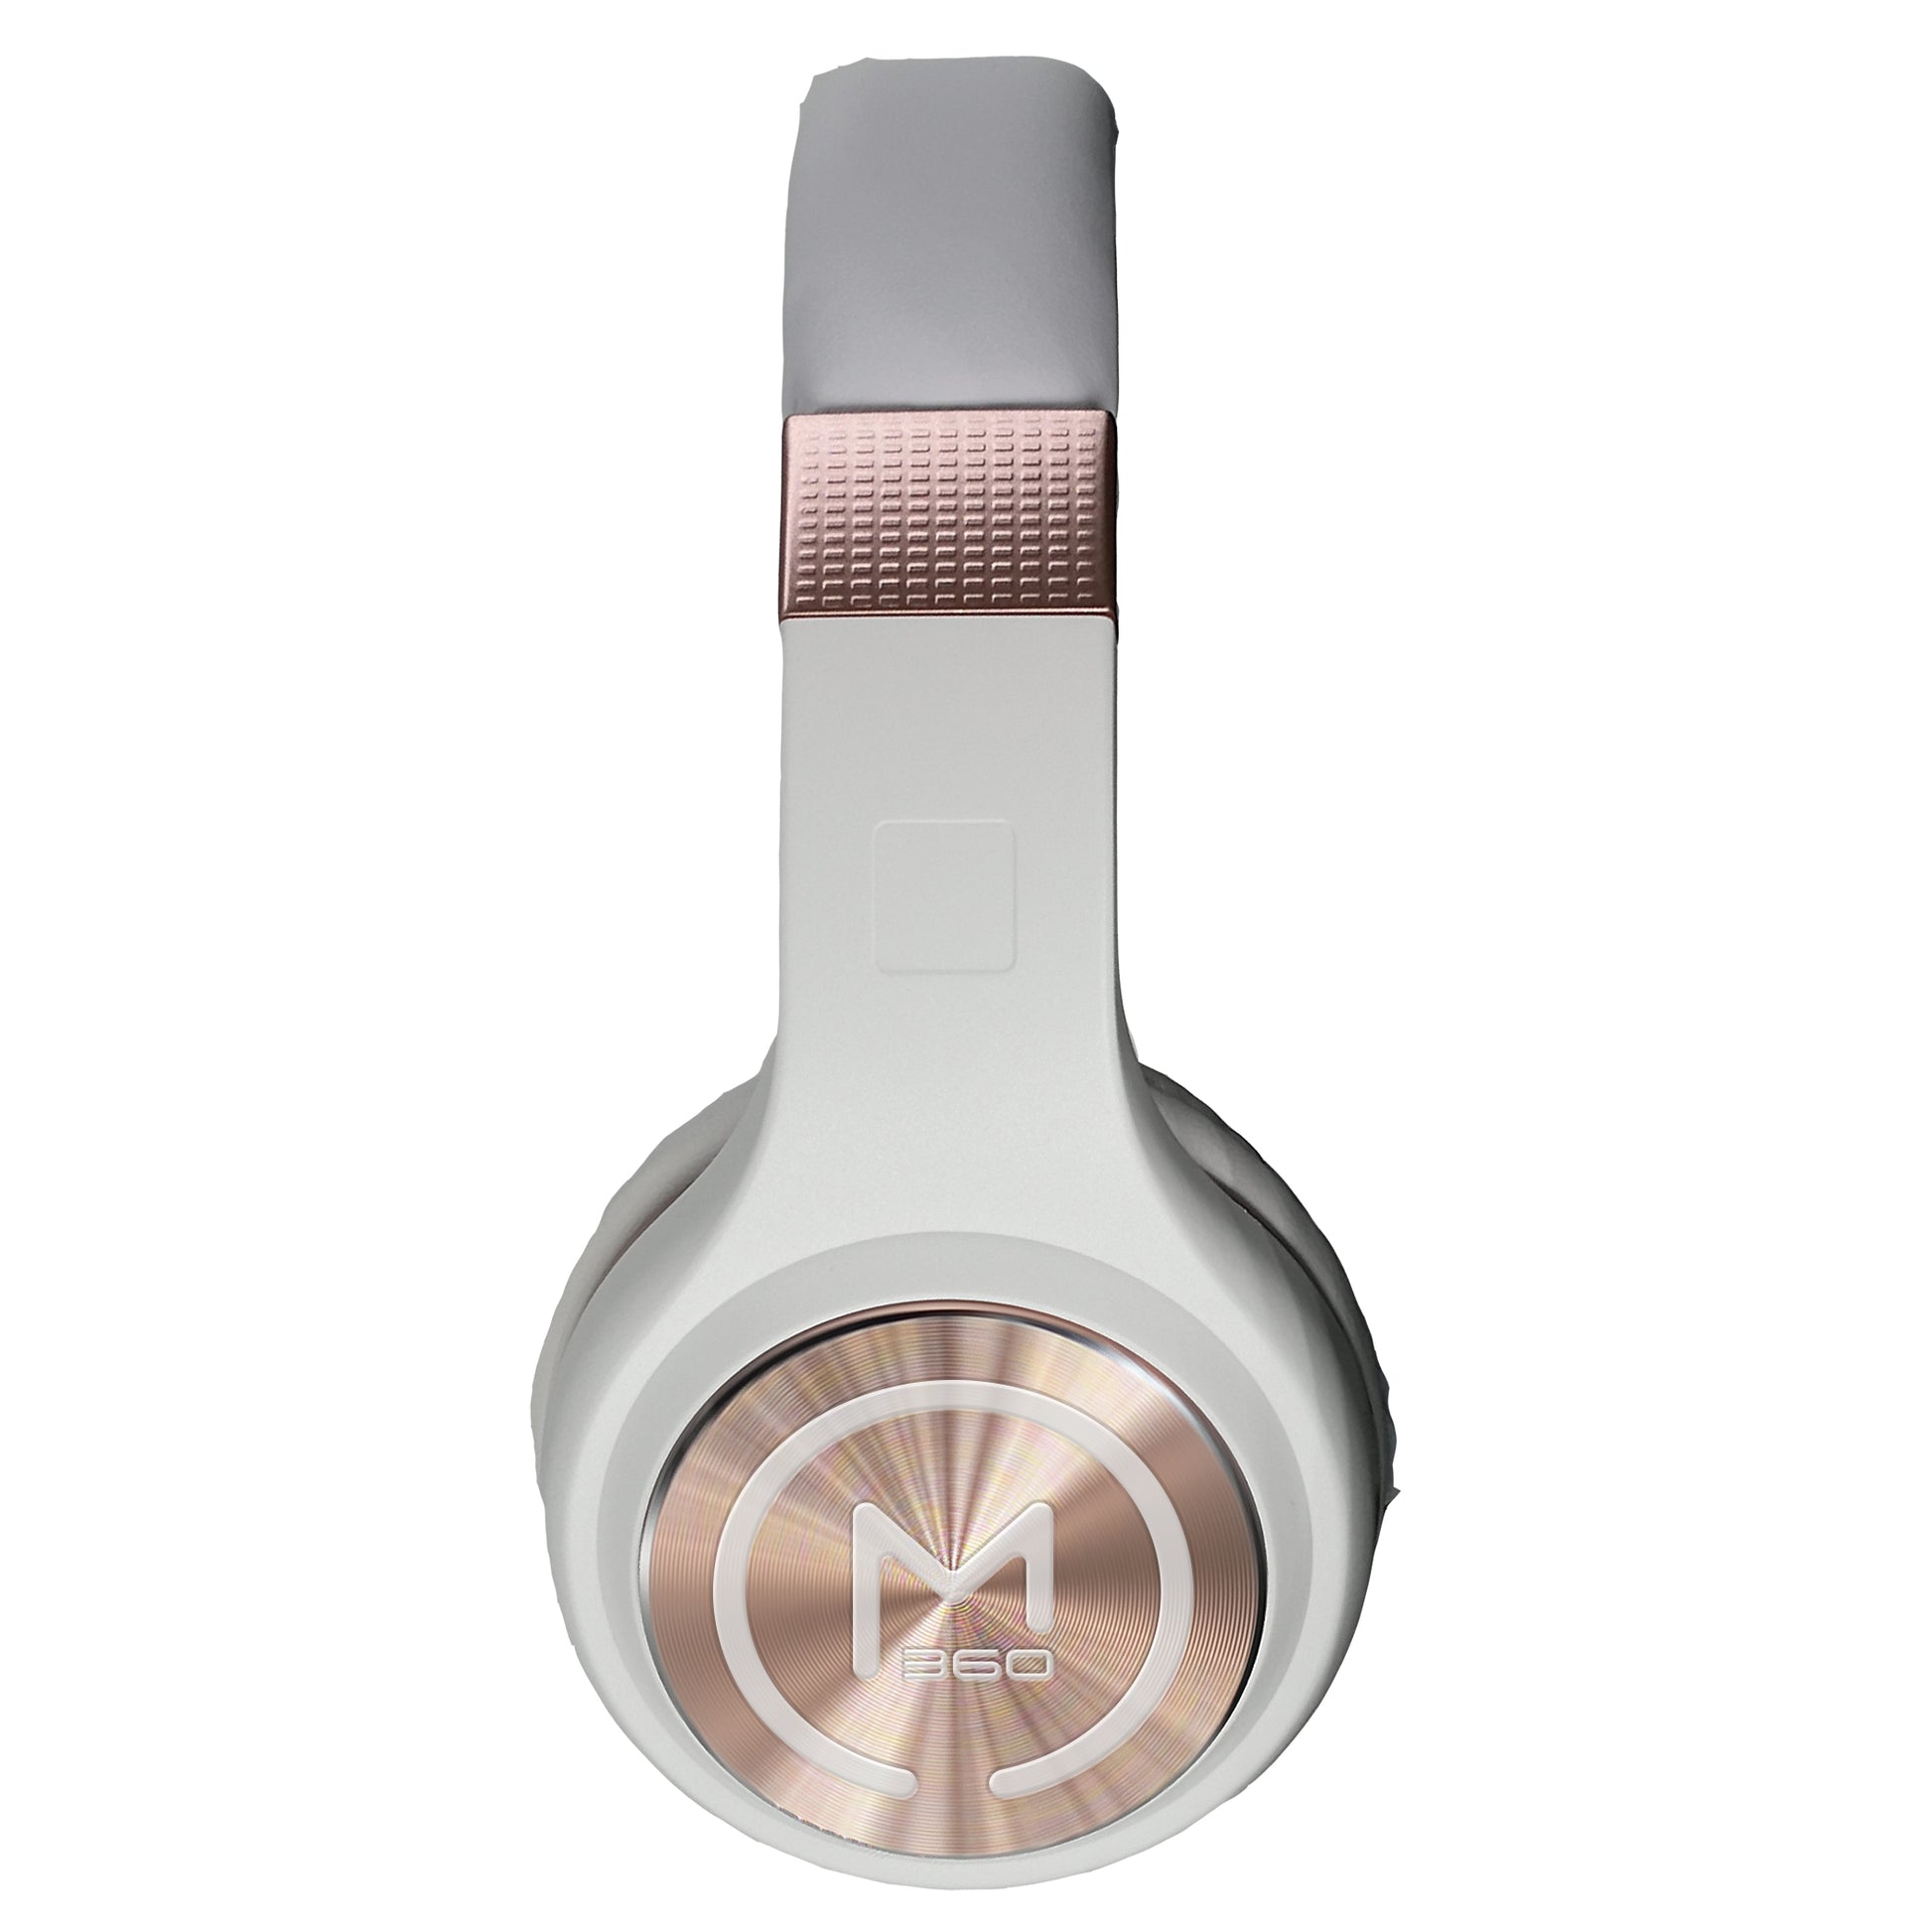 Photo of Morpheus 360 Serenity Wireless Over Ear Headphones from the side. White with Rose Gold accents.